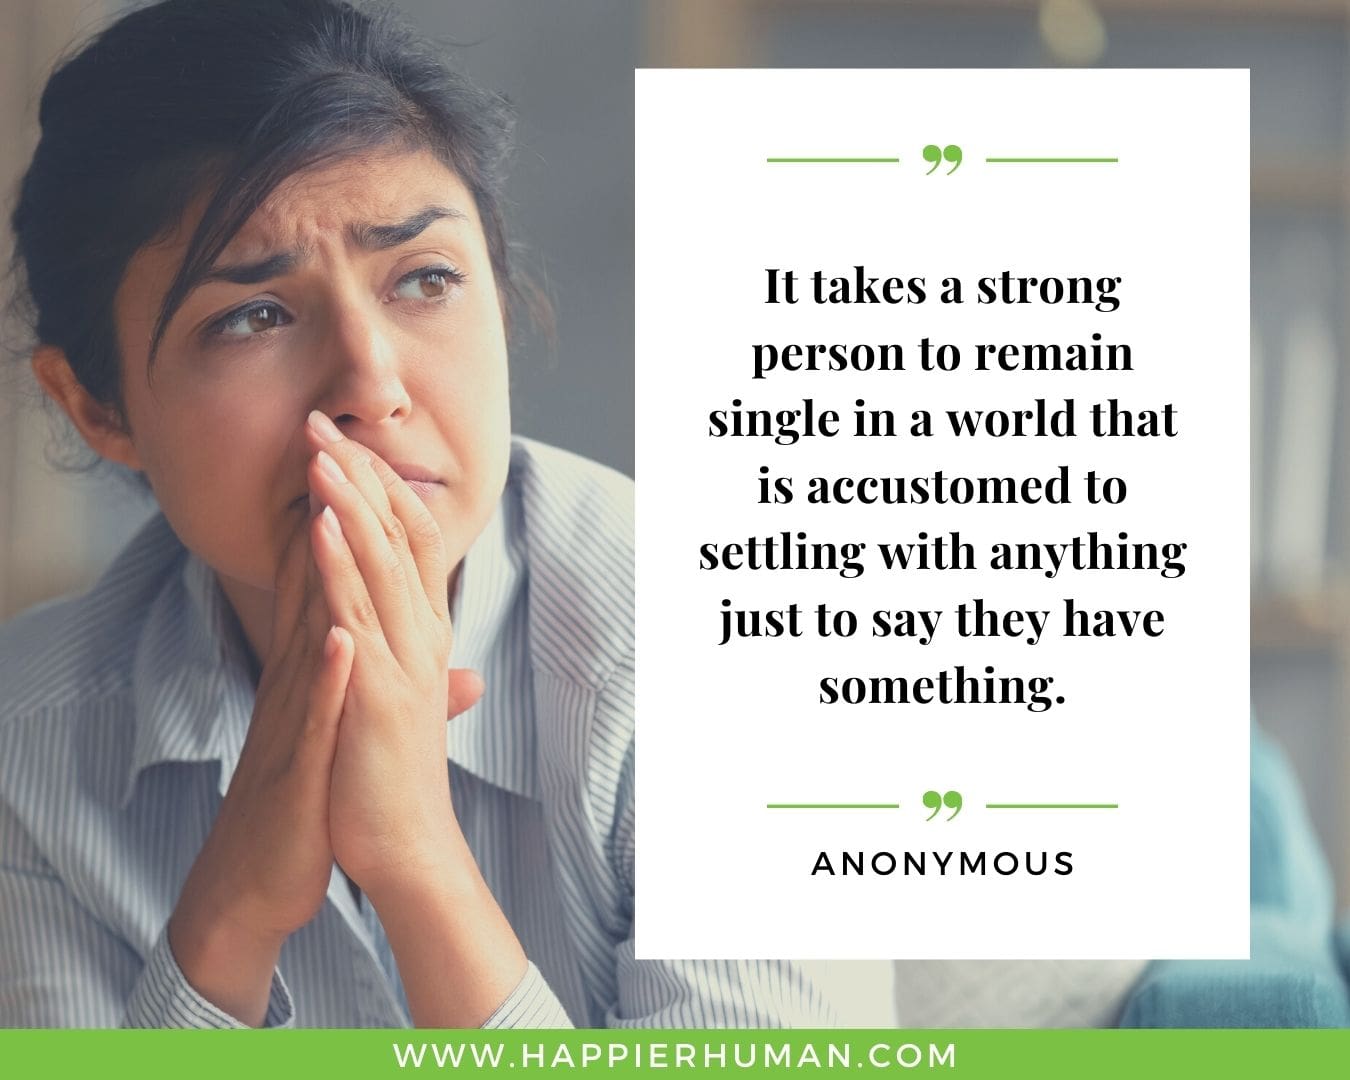 Loneliness Quotes - “It takes a strong person to remain single in a world that is accustomed to settling with anything just to say they have something.”– Anonymous